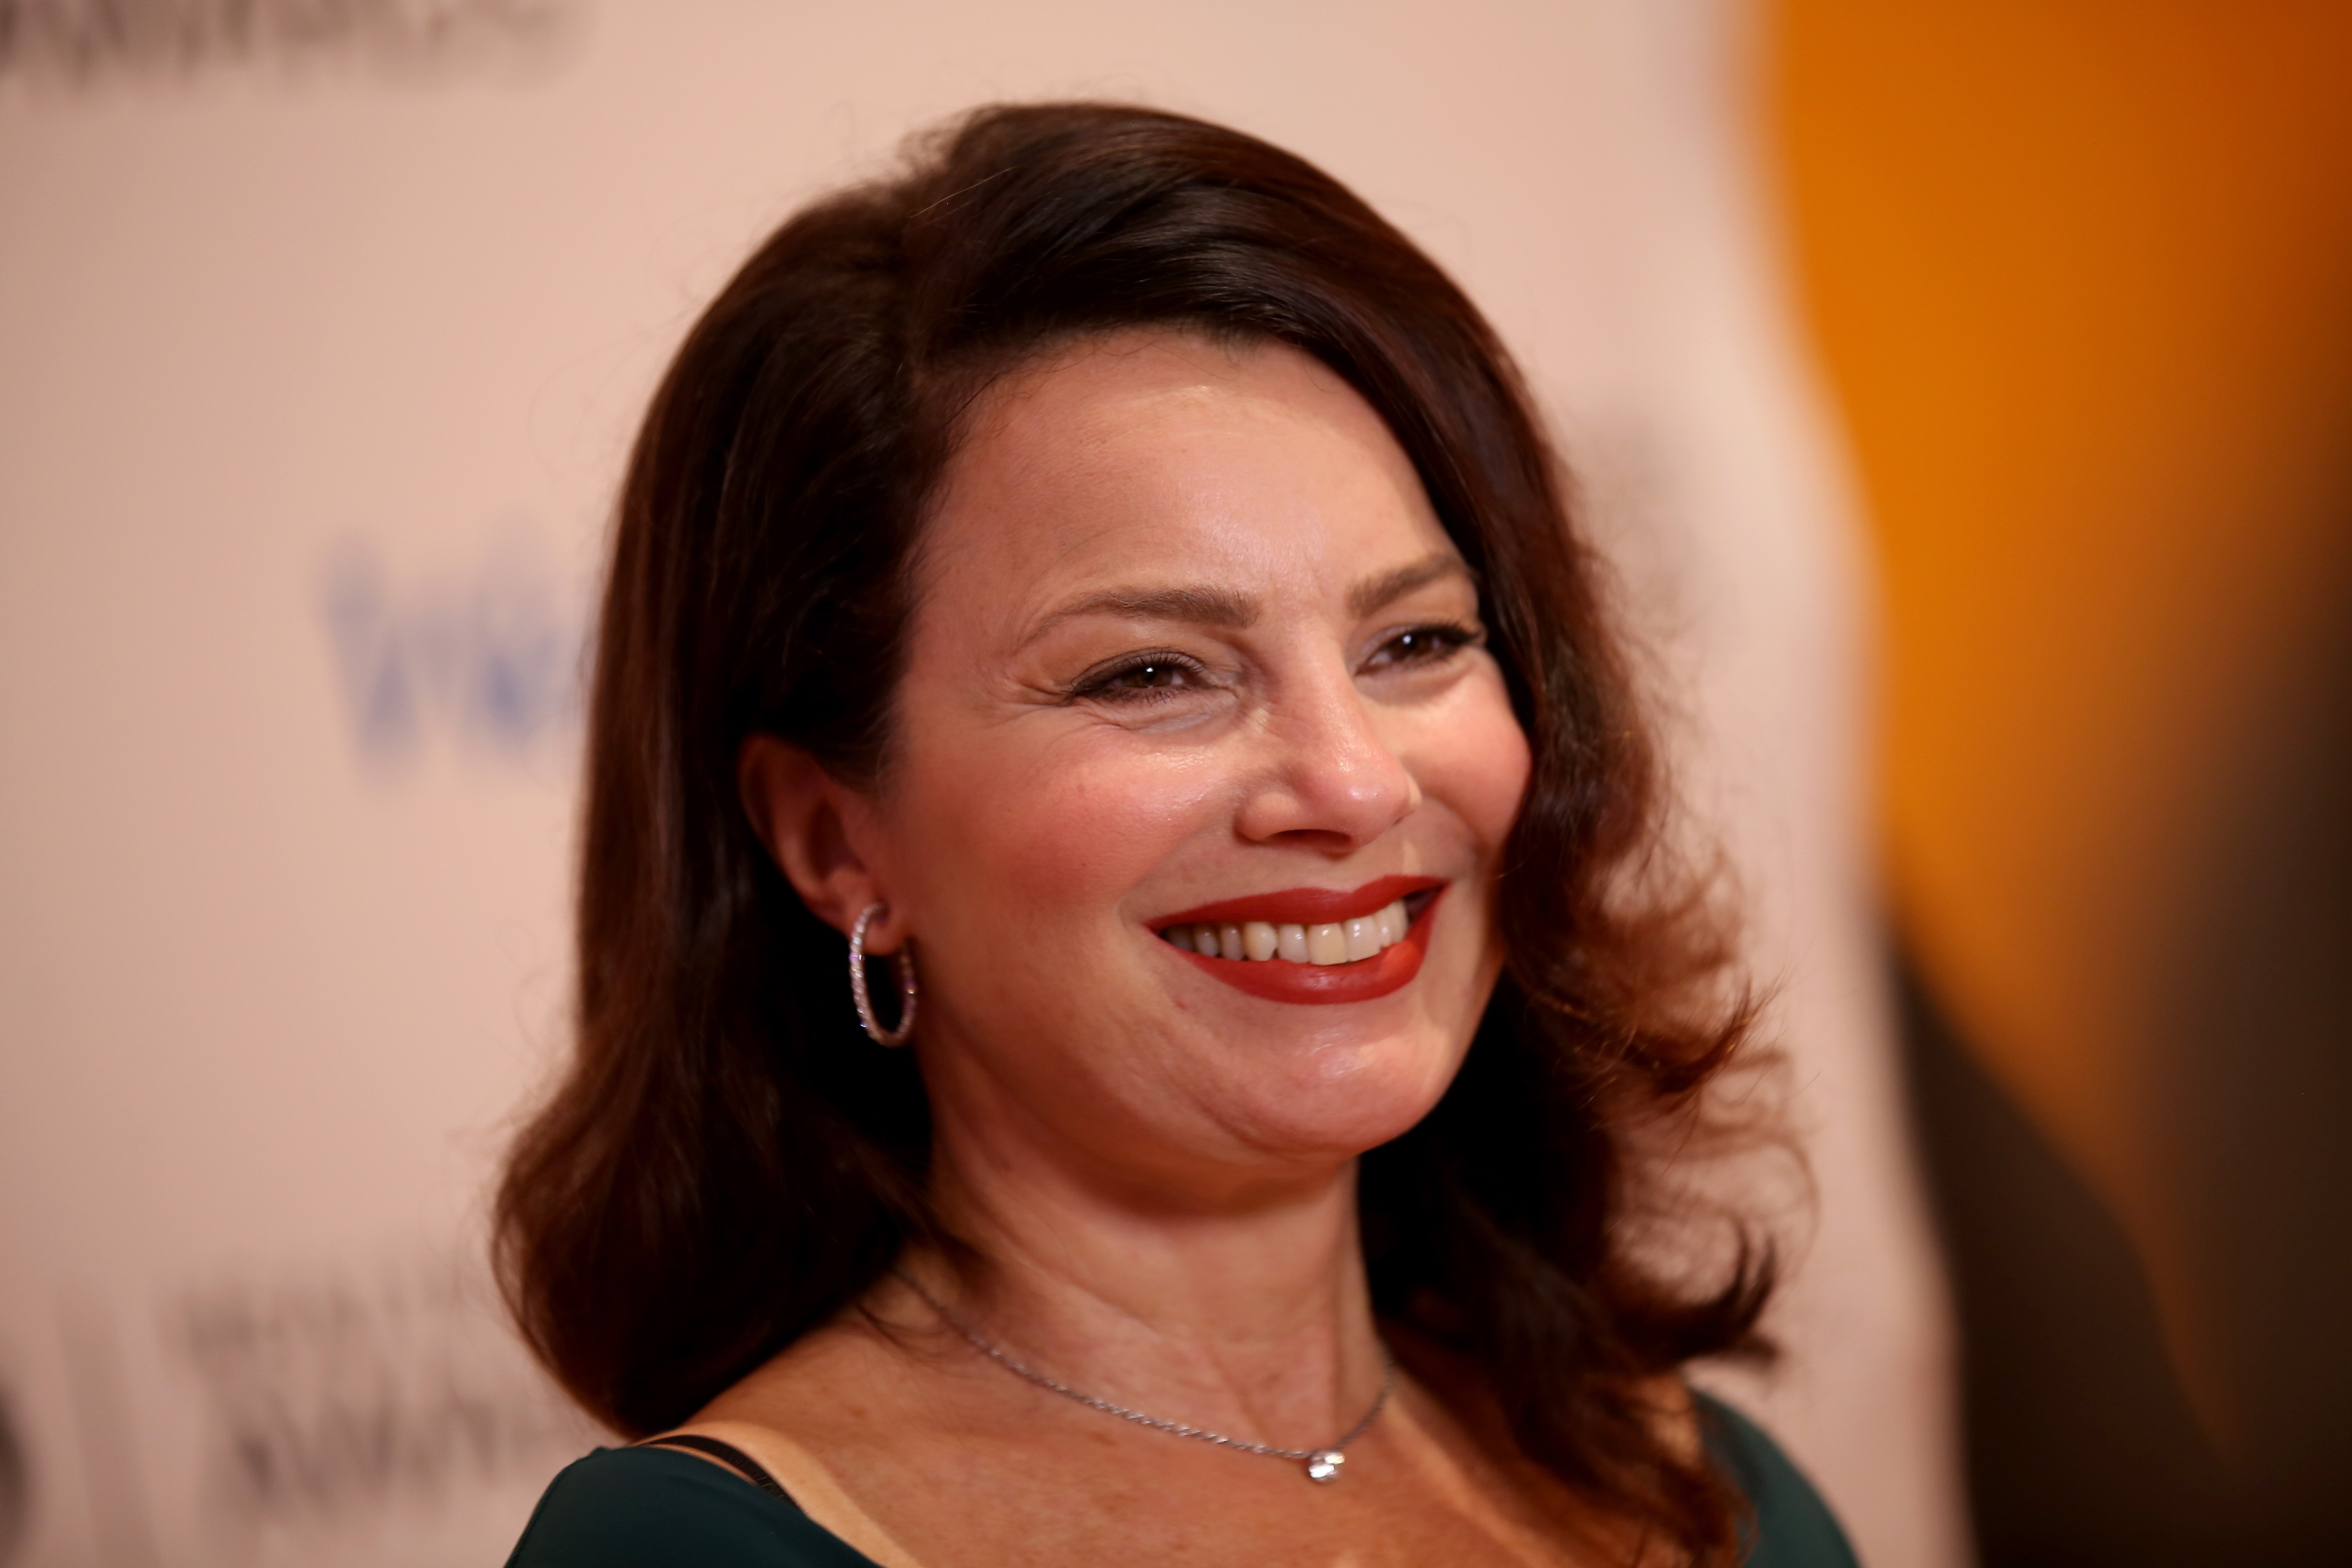 Fran Drescher attends the 2015 Health Hero Awards hosted by WebMD on November 5, 2015 | Photo: GettyImages